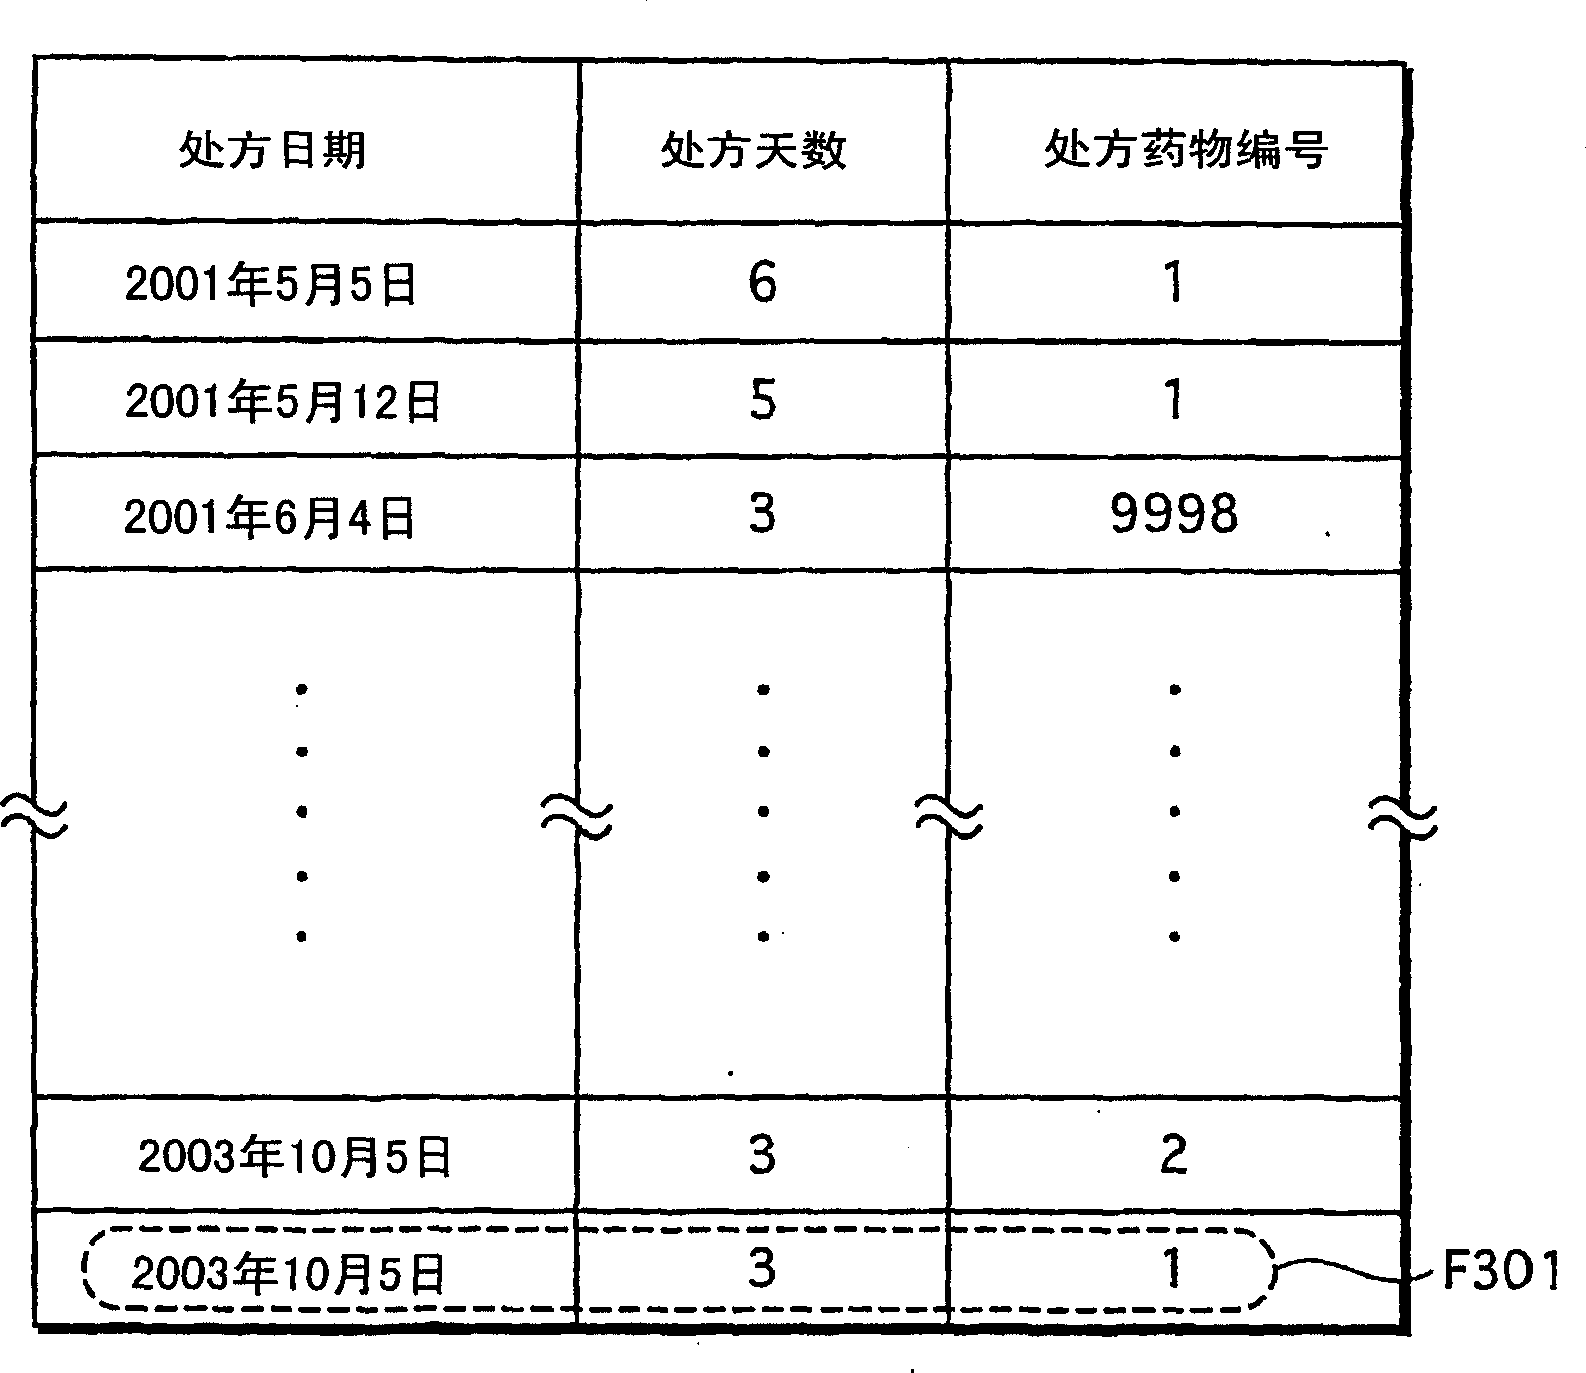 Mobile medication history management apparatus, memory card, and management method